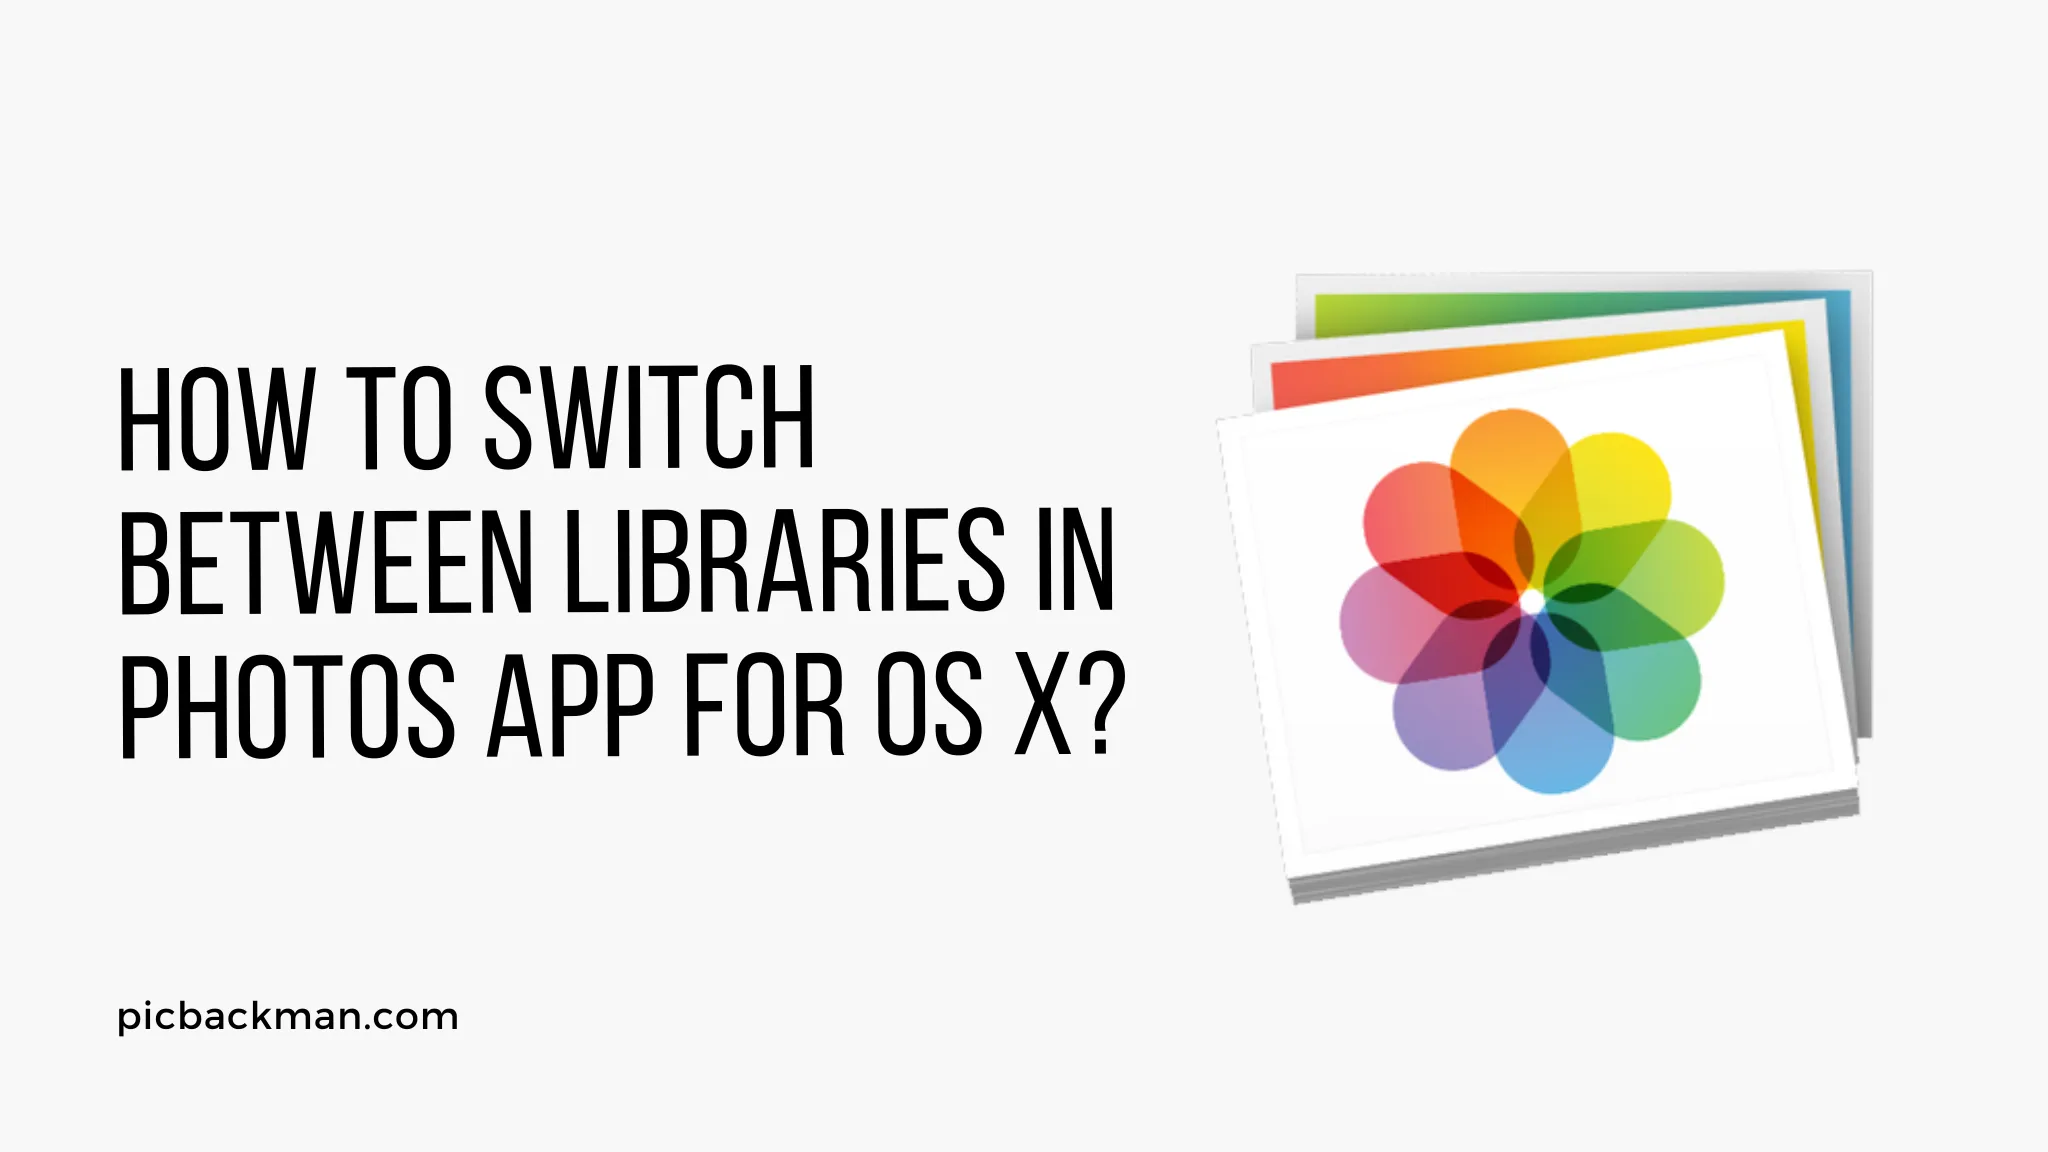 How to Switch Between Libraries in Photos App for OS X?